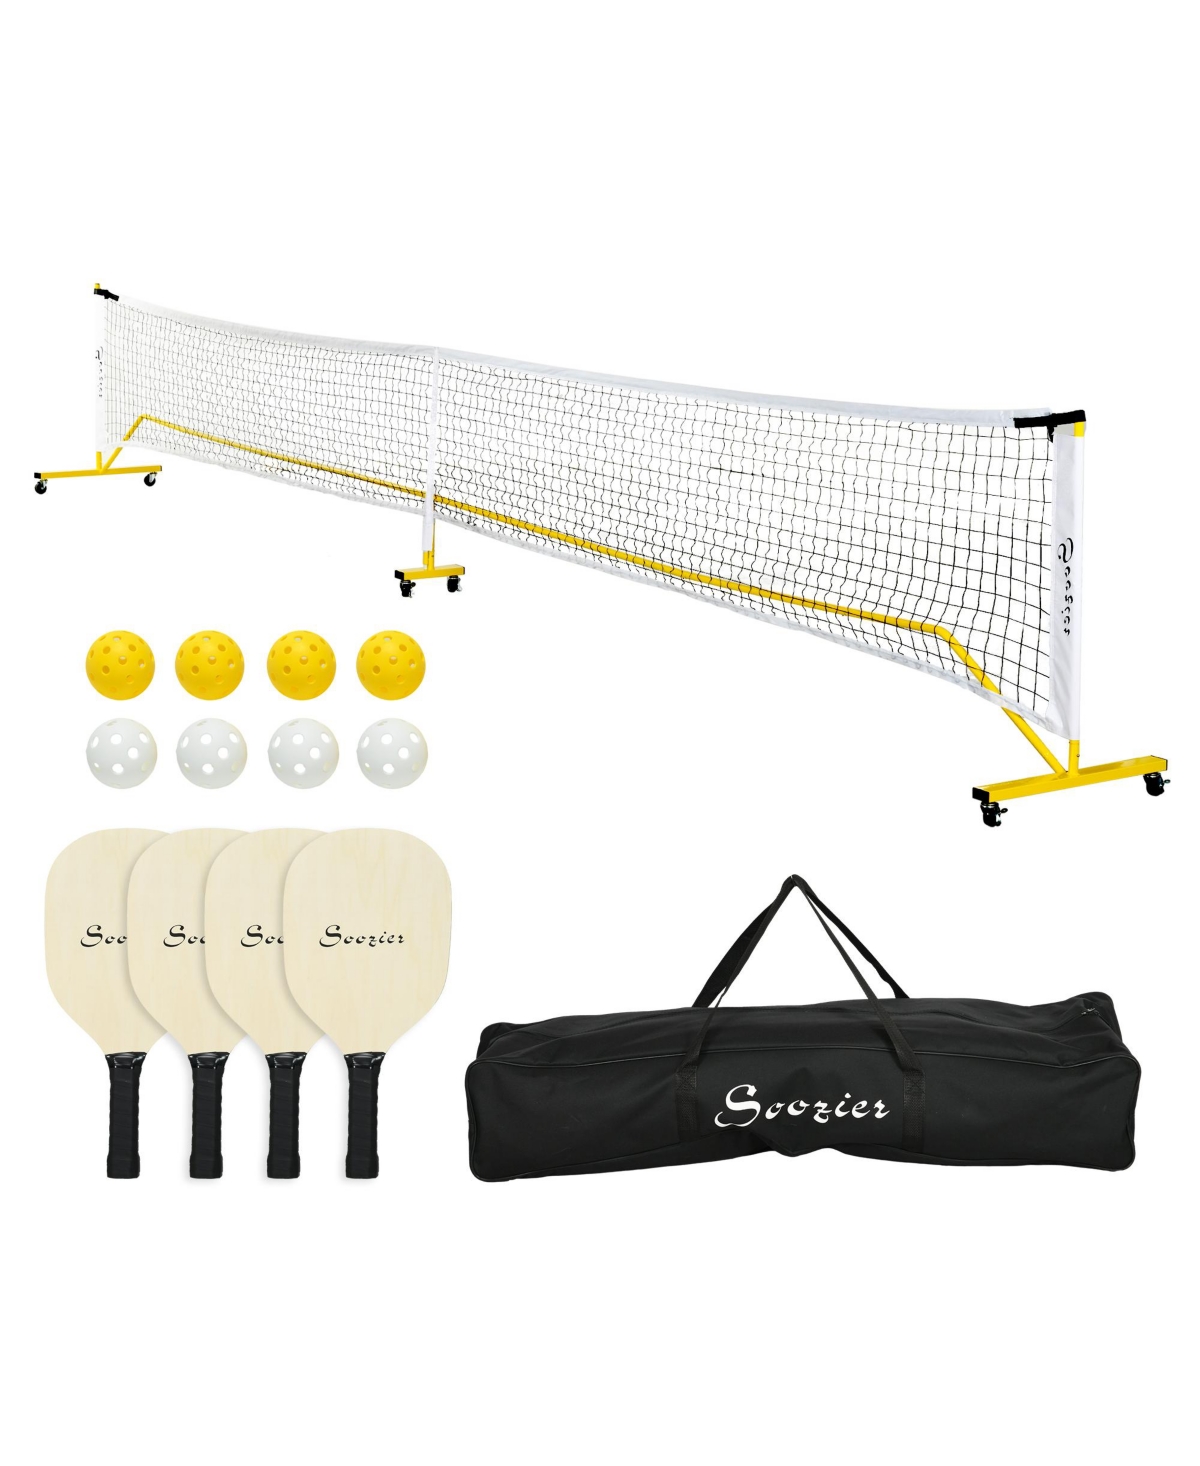 Pickle ball Set with Net, Court Markers and Wheels, 22 Ft Regulation Size - Yellow, white and black